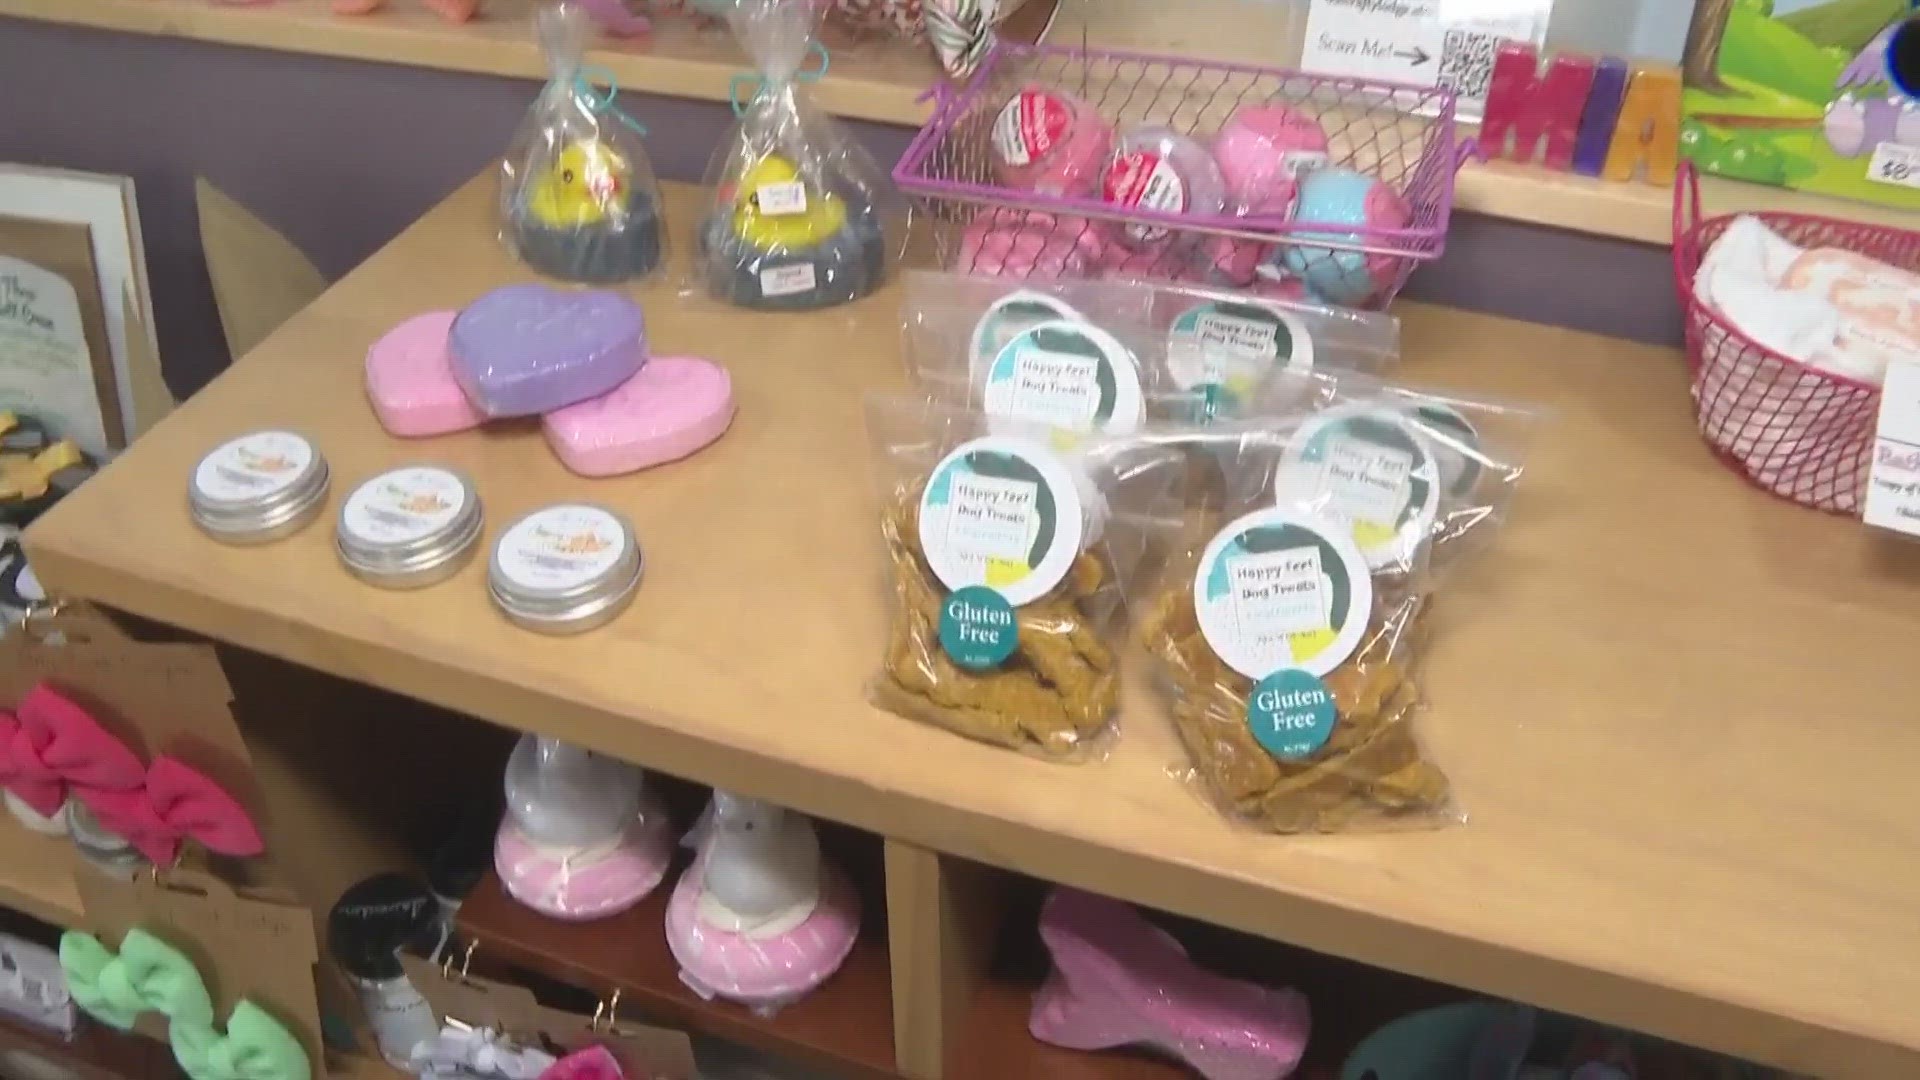 Need some ideas for Mother's Day?  Stephanie Haney checks out a new soap shop run by a local family dedicated to using natural products from here in Ohio.